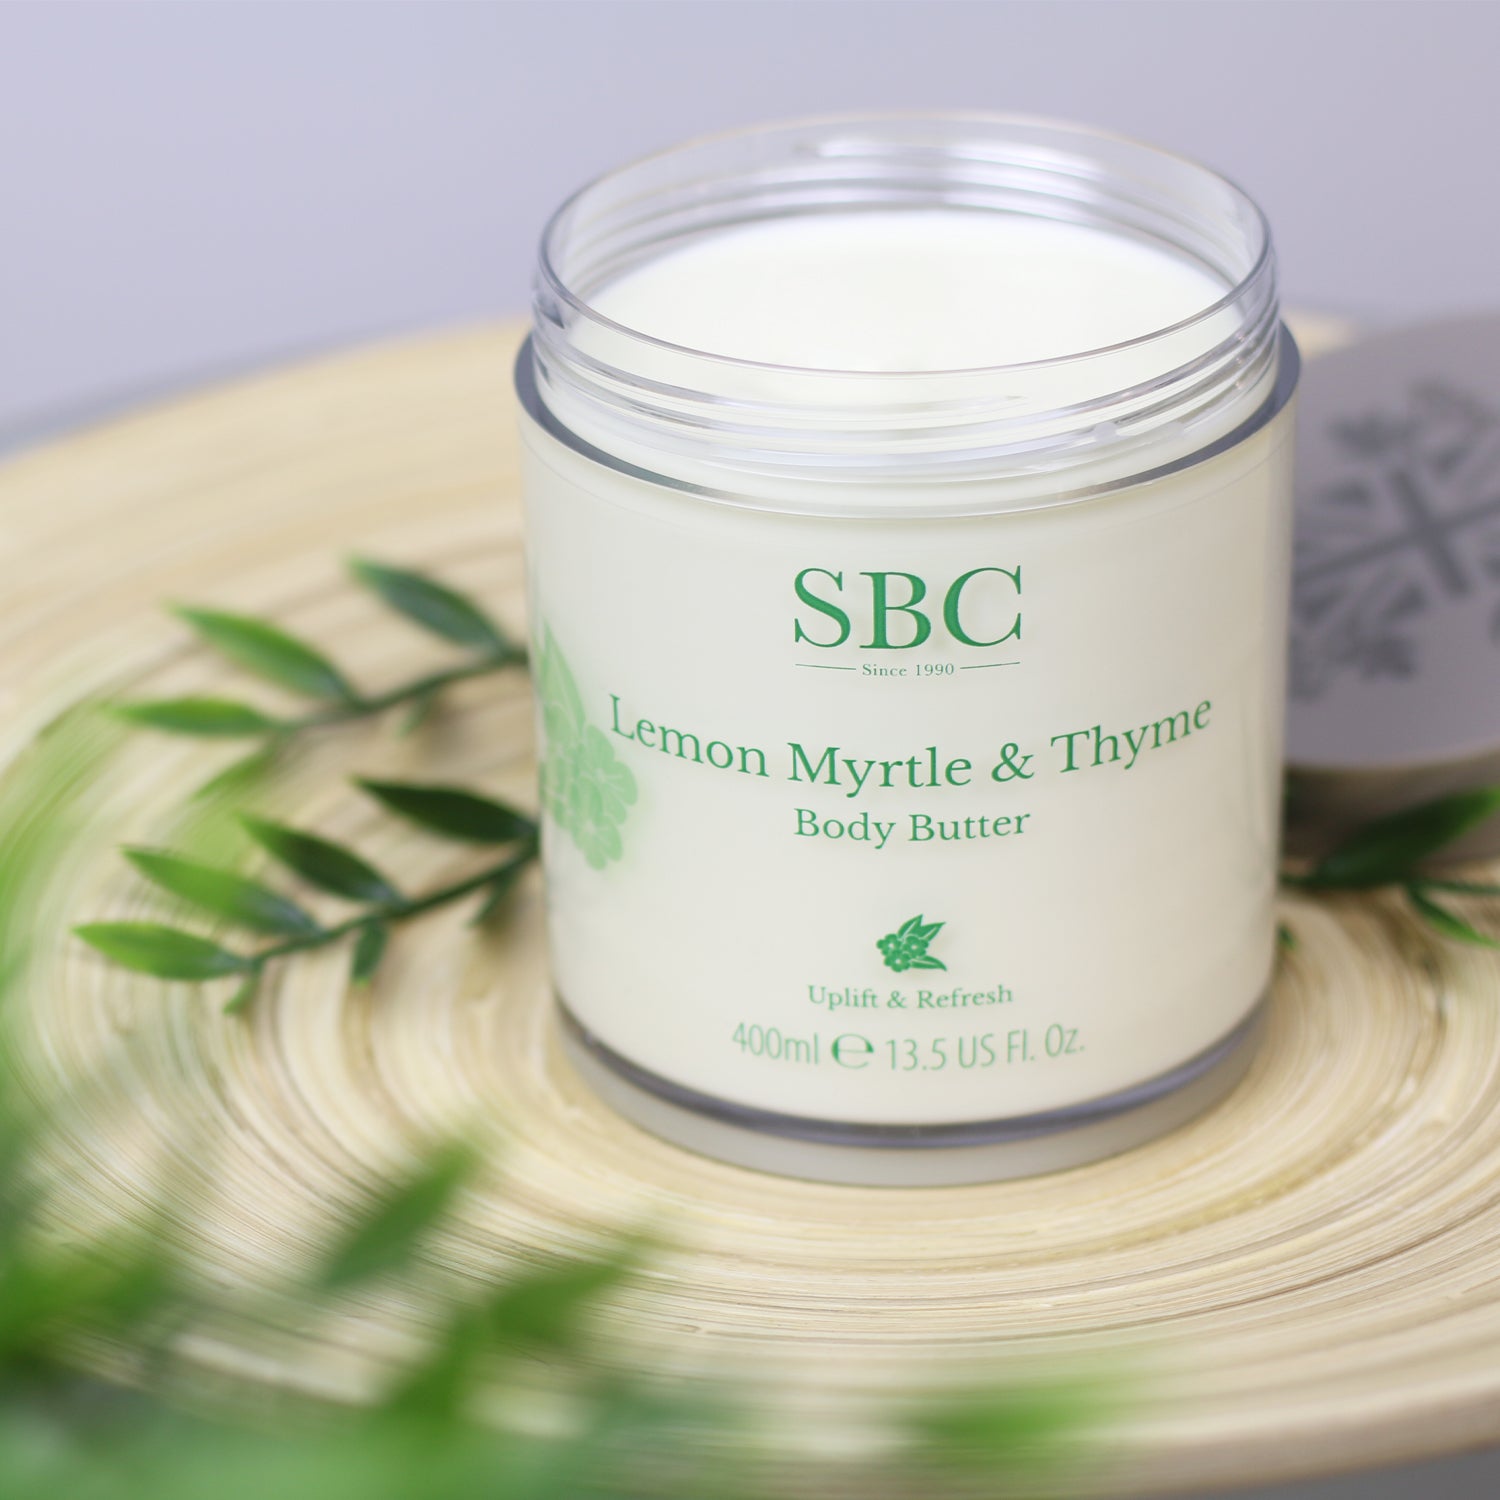 Lemon Myrtle & Thyme Body Butter on a wooden plate with leaves